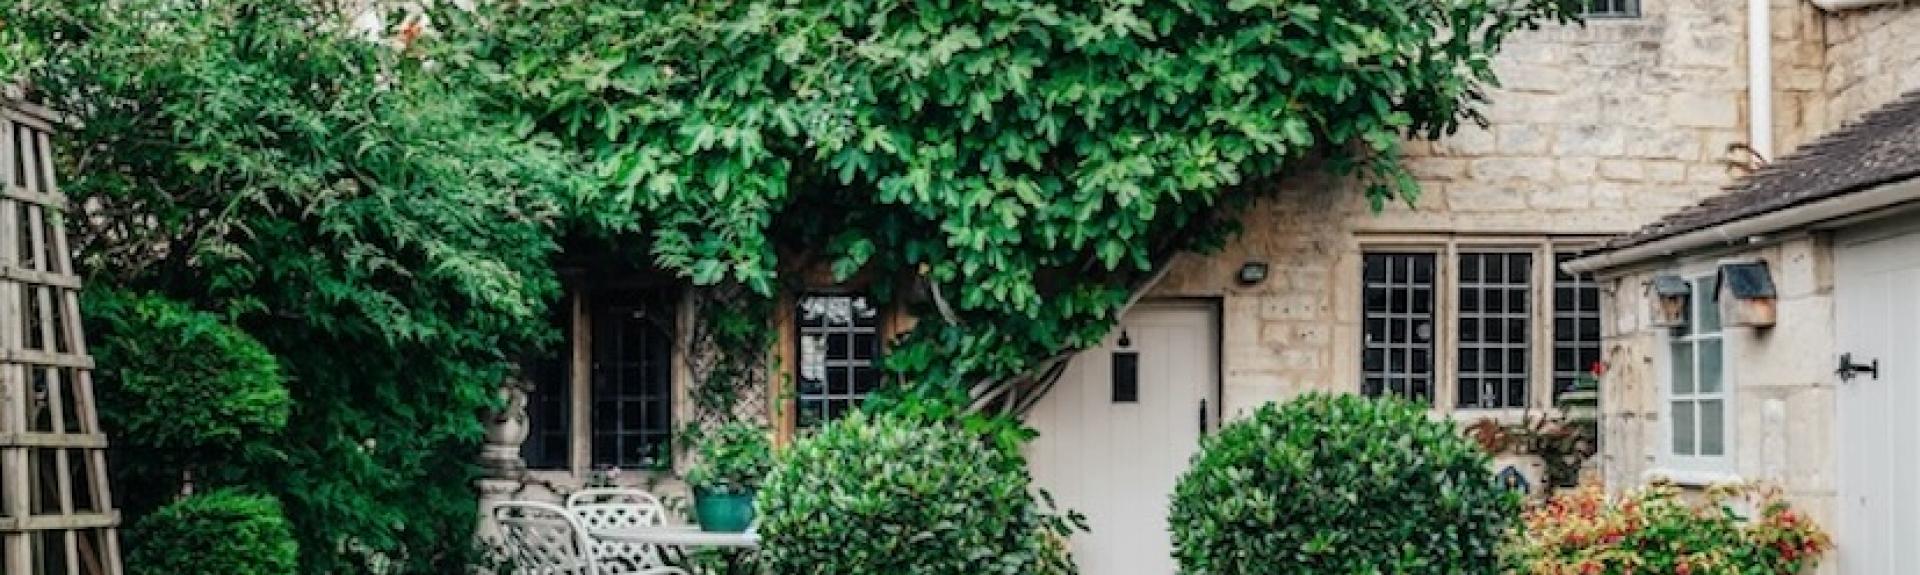 A Cotswold holidy cottage with a vine-covered exterior.